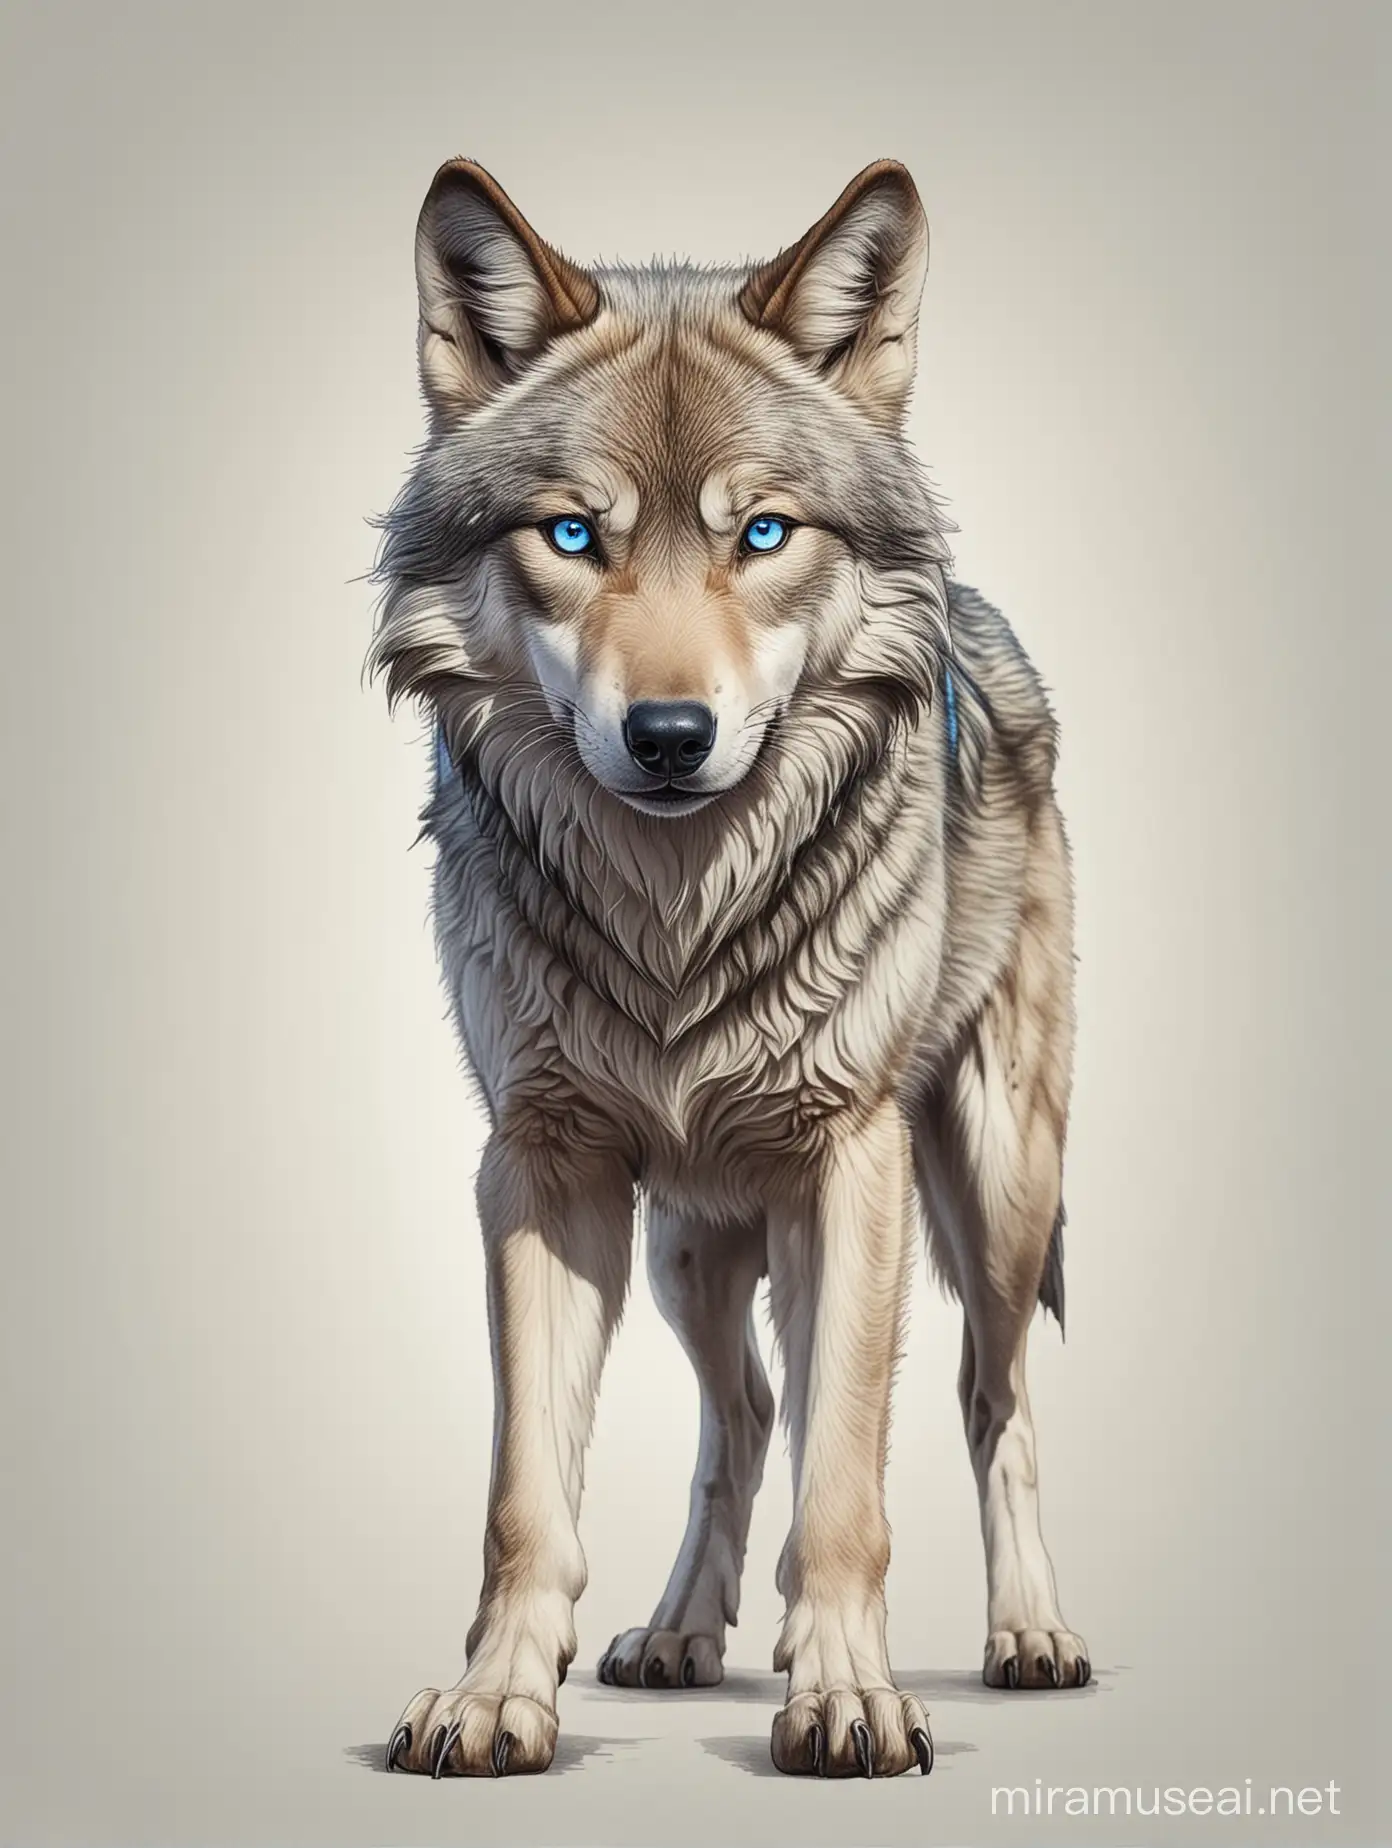 Majestic BlueEyed Wolf in Classic Sketch Style on White Background